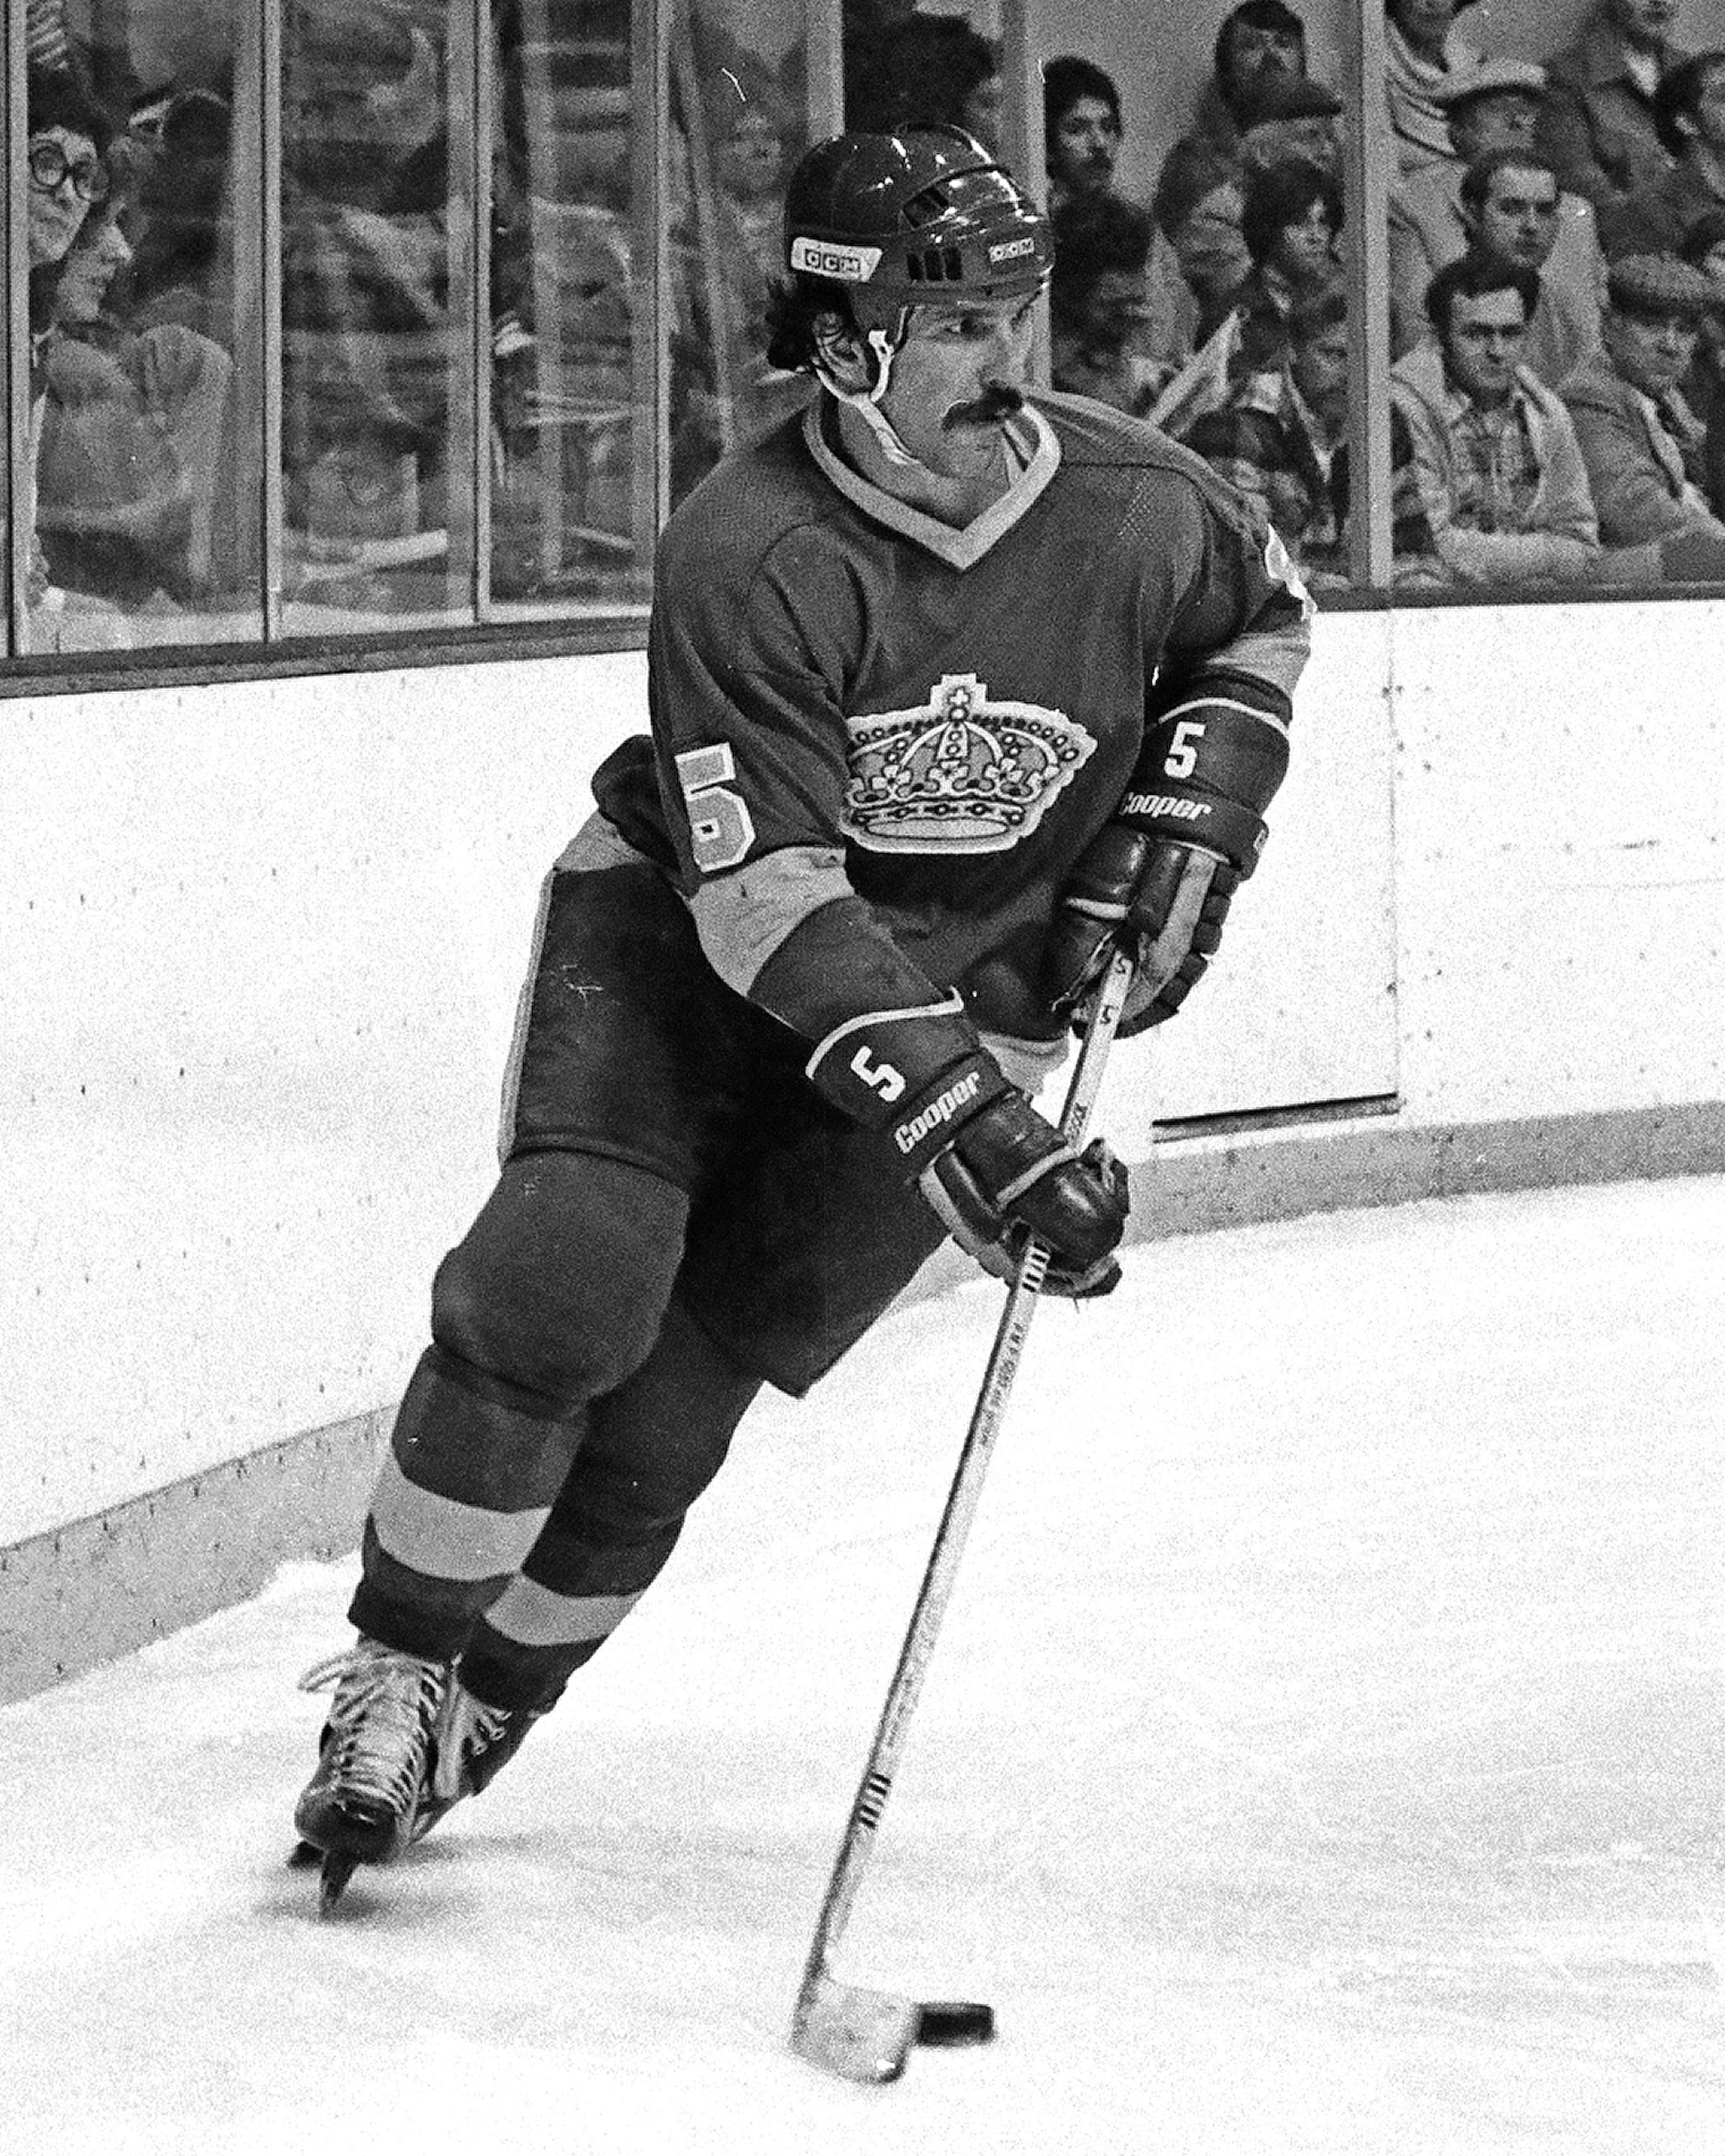 BOSTON, MA - 1970s: Bob Murdoch #5 of the Los Angeles Kings skates with puck in game against the Boston Bruins at Boston Garden.